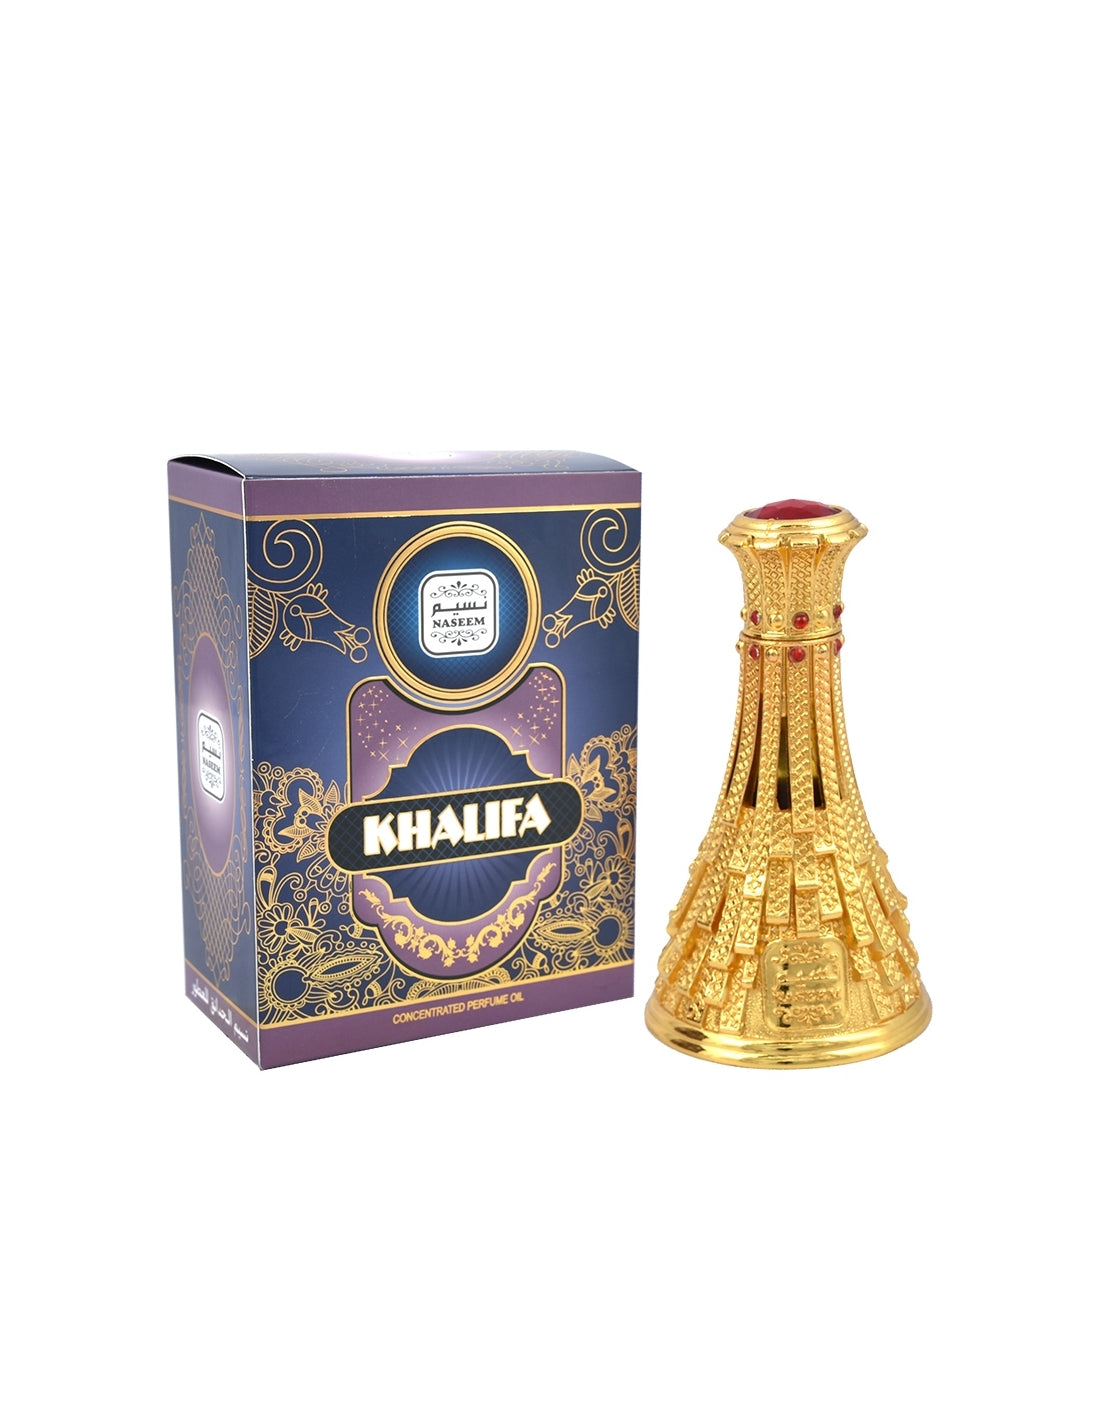 Khalifa Concentrated Perfume Oil 15ml